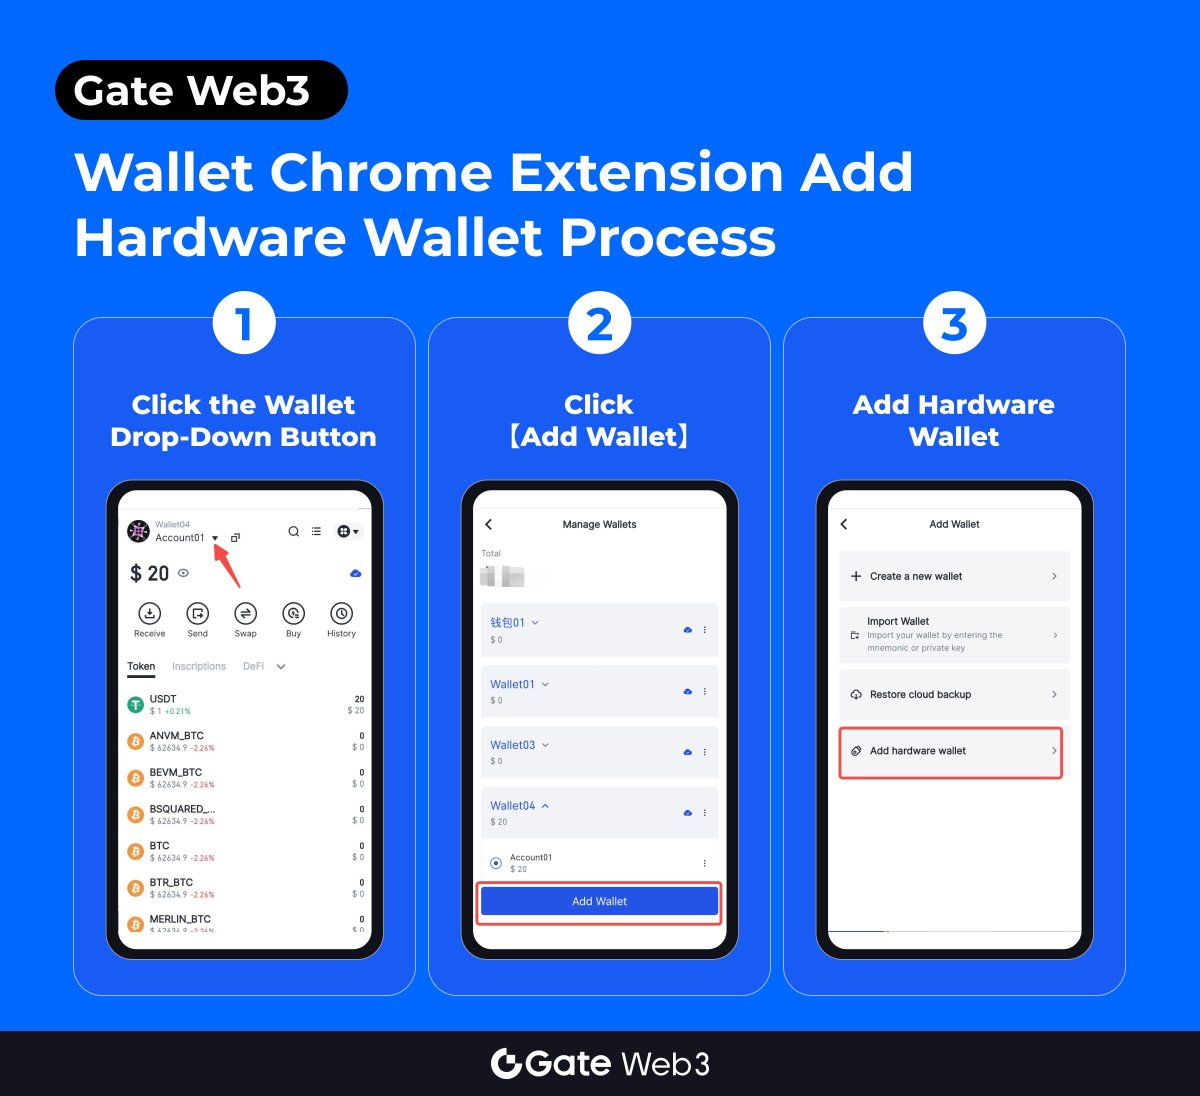 📣#GateWeb3Wallet Upgraded!

✅Chrome Extension supports the #HardwareWallet function

🤔Add Hardware Wallet only takes 3 steps👇

#GateWeb3 #HardwareWallet